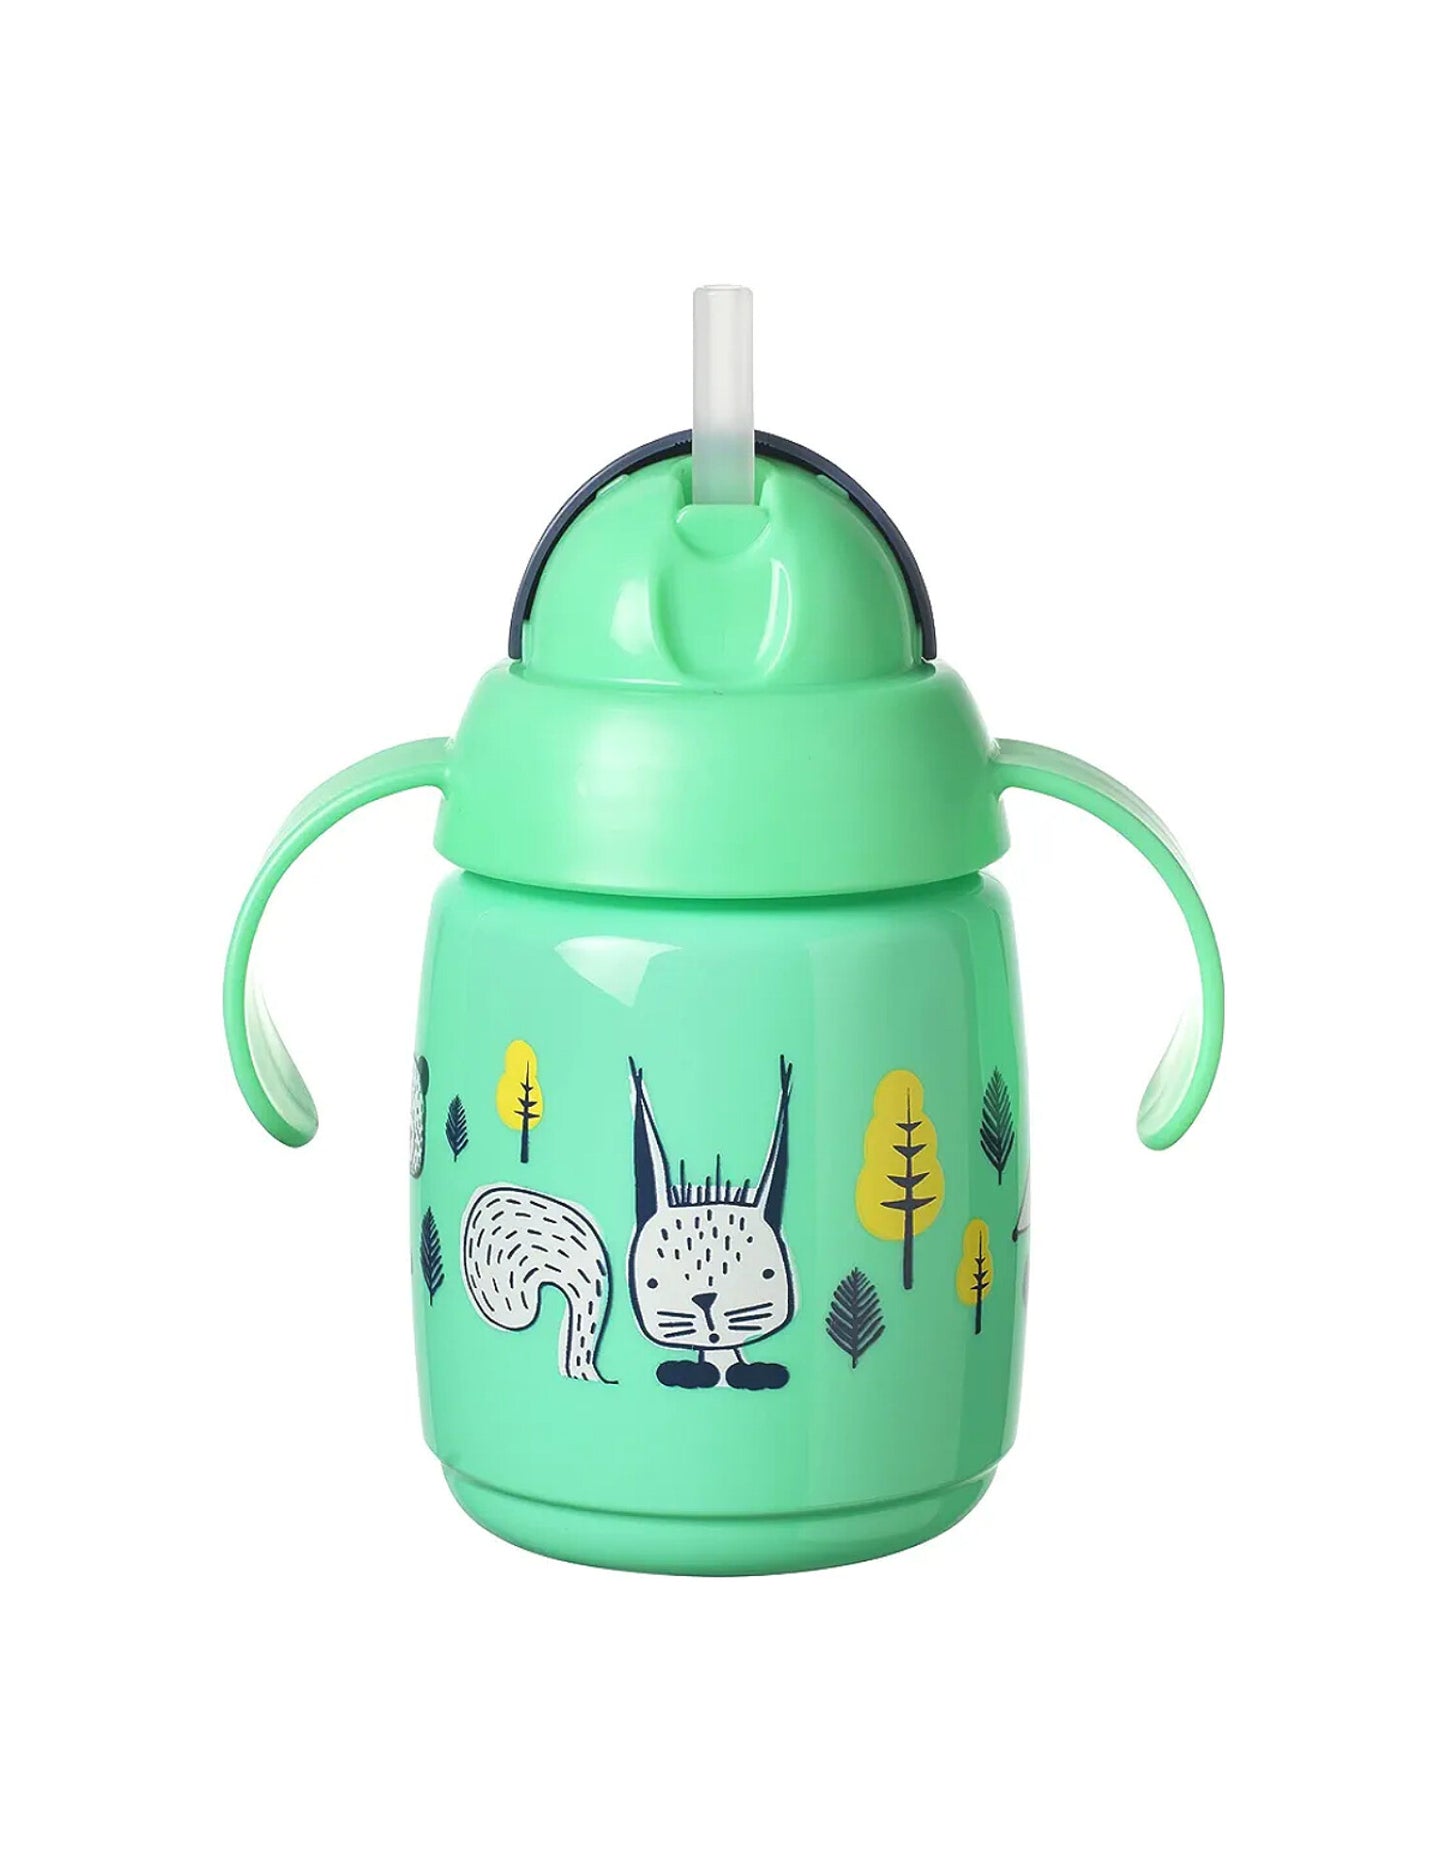 Tommee Tippee Superstar Weighted Straw Cup for Toddlers - Diaper Yard Gh